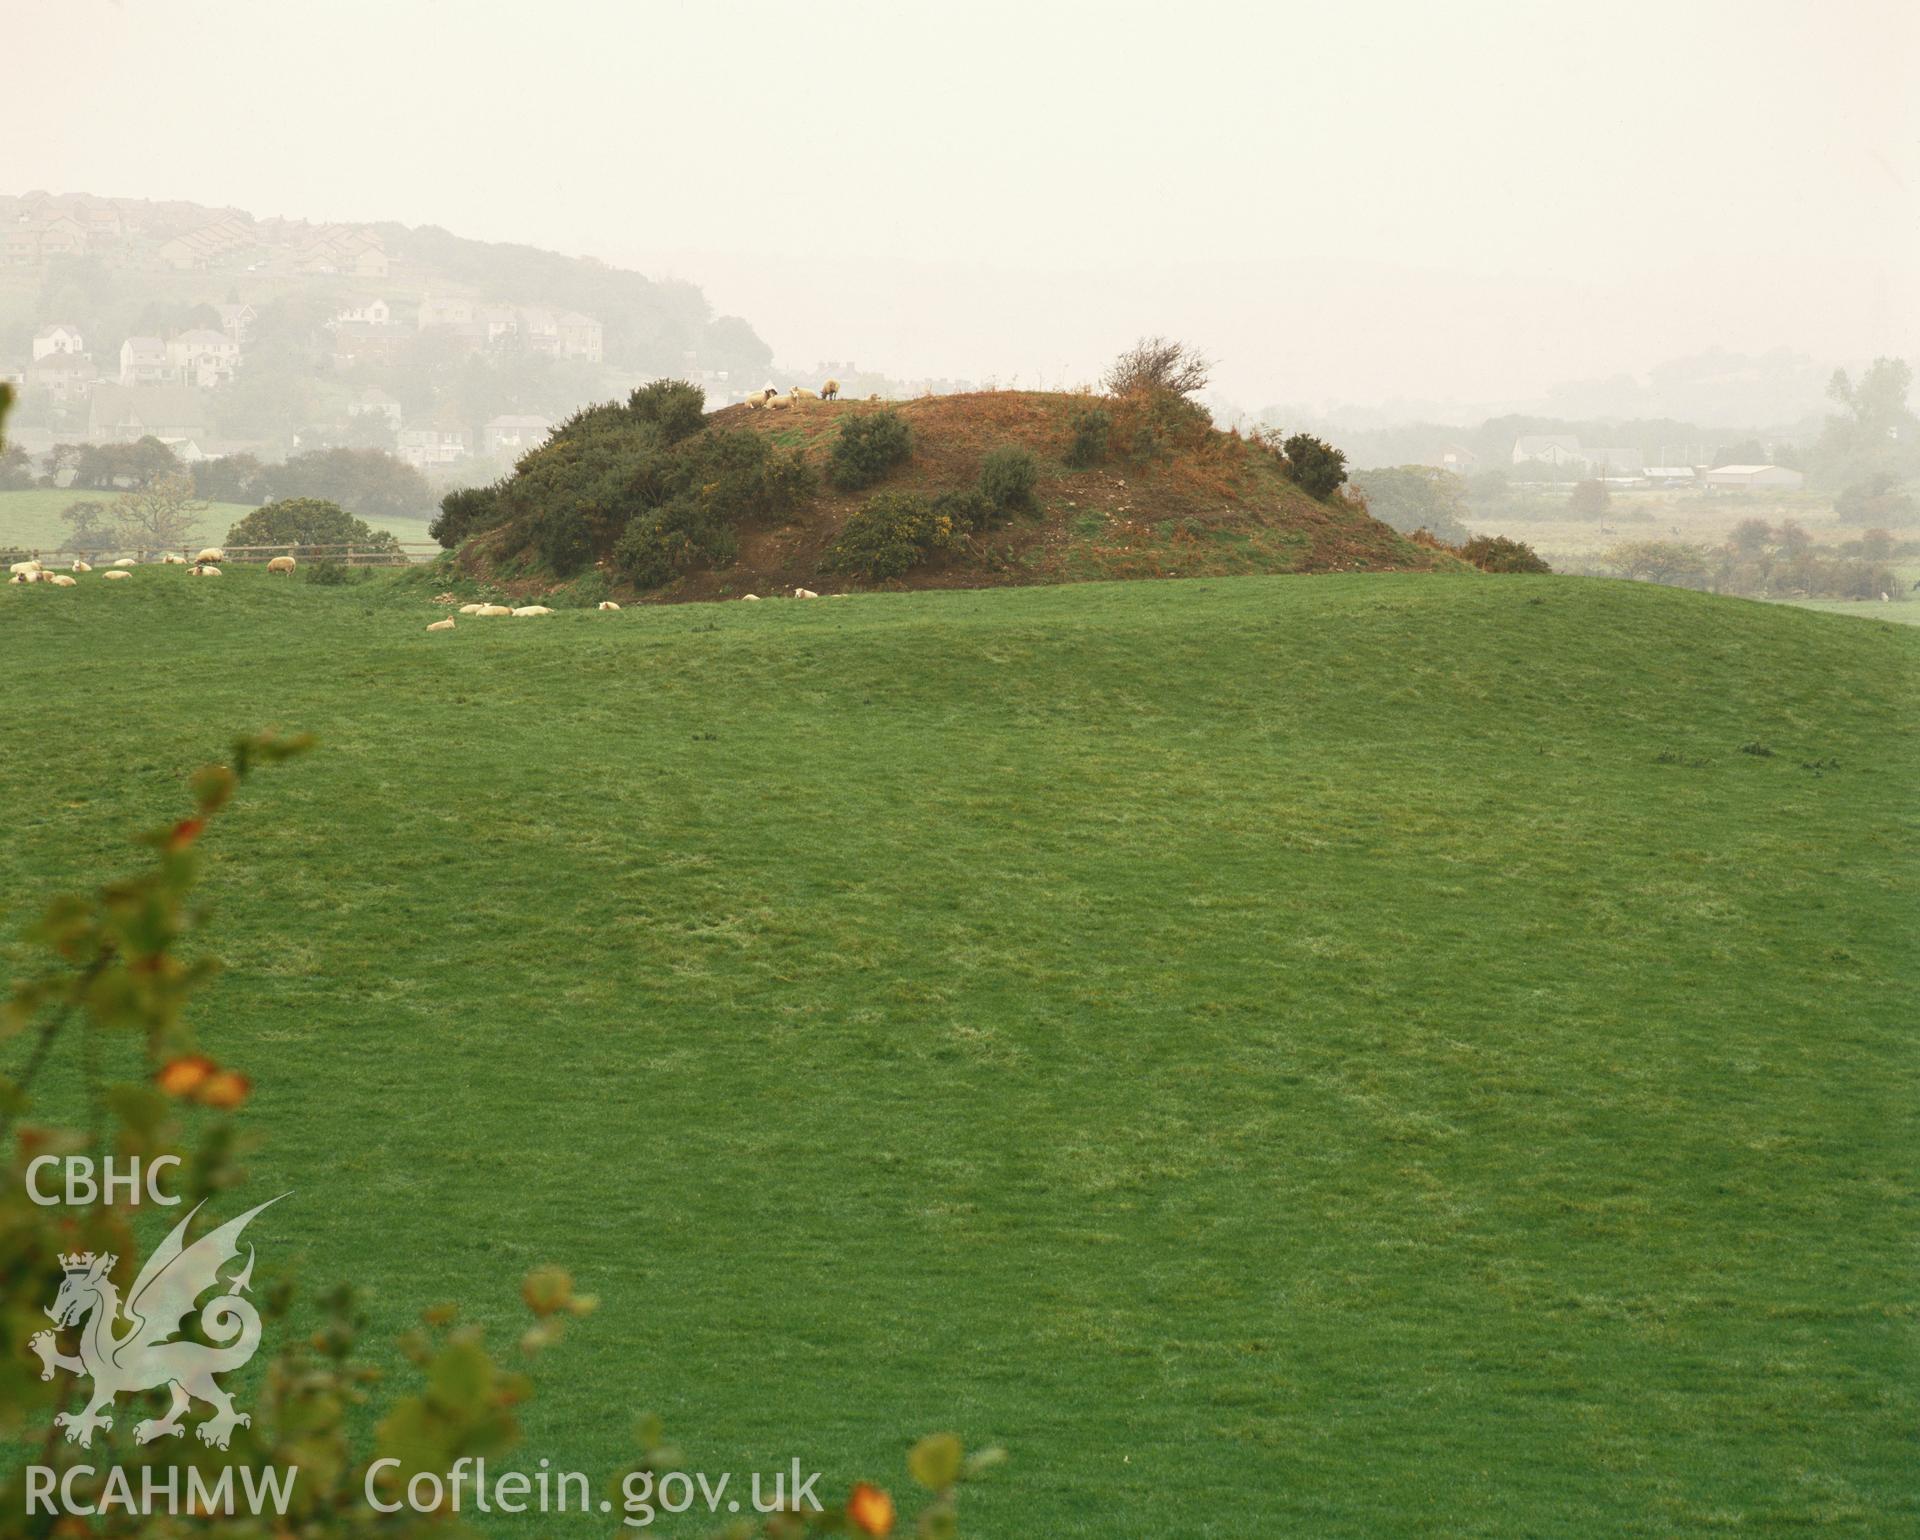 RCAHMW colour transparency showing view of Talybont Castle, taken by Iain Wright, c.1991